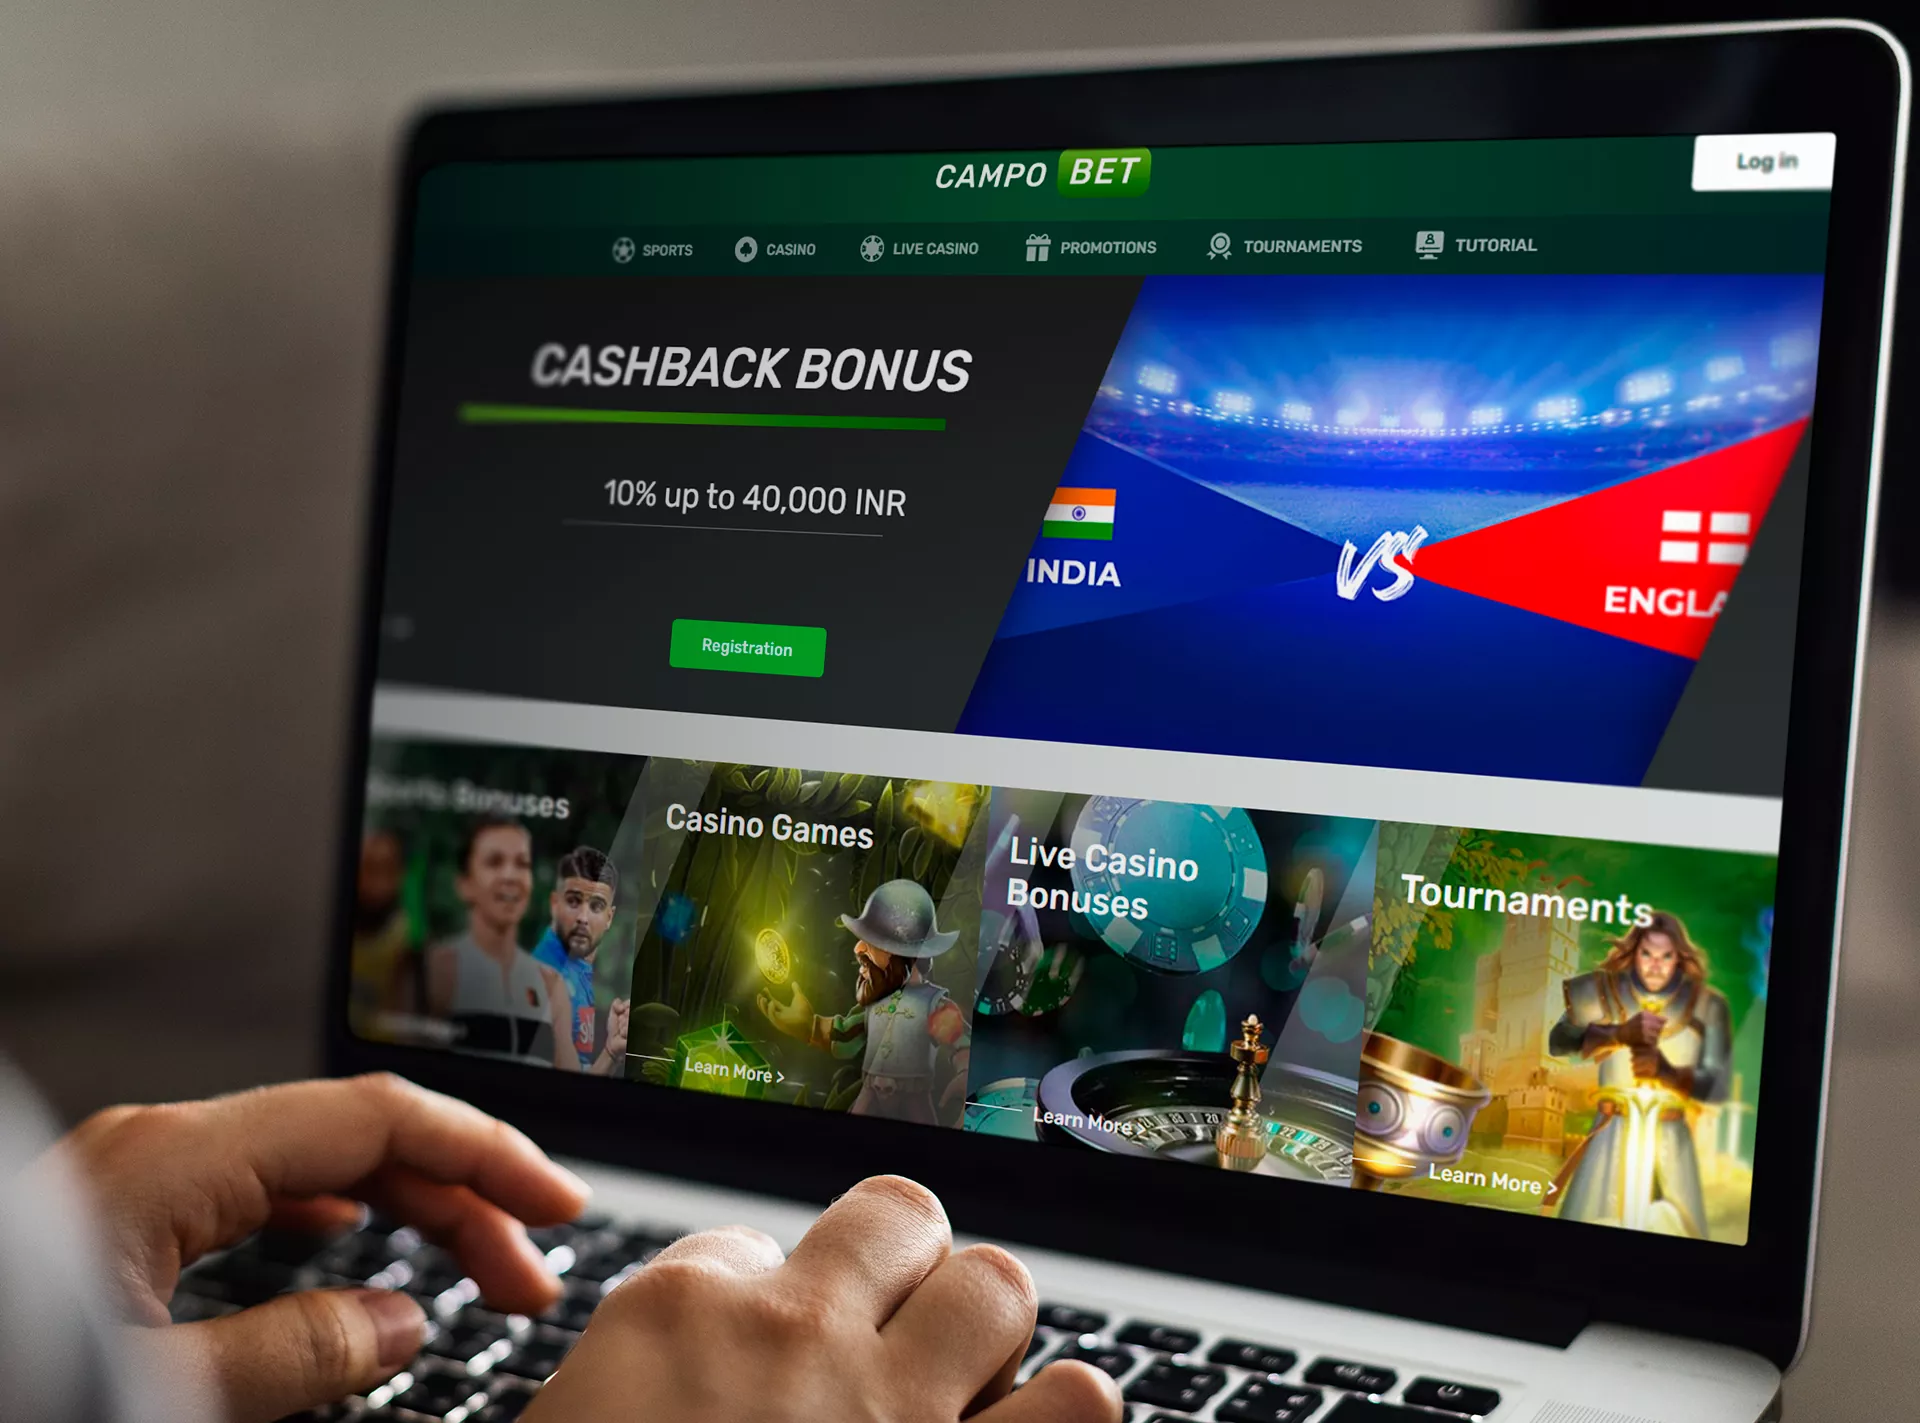 Open an official website on your laptop or mobile phone and enjoy beautiful onterface and pleasant betting.